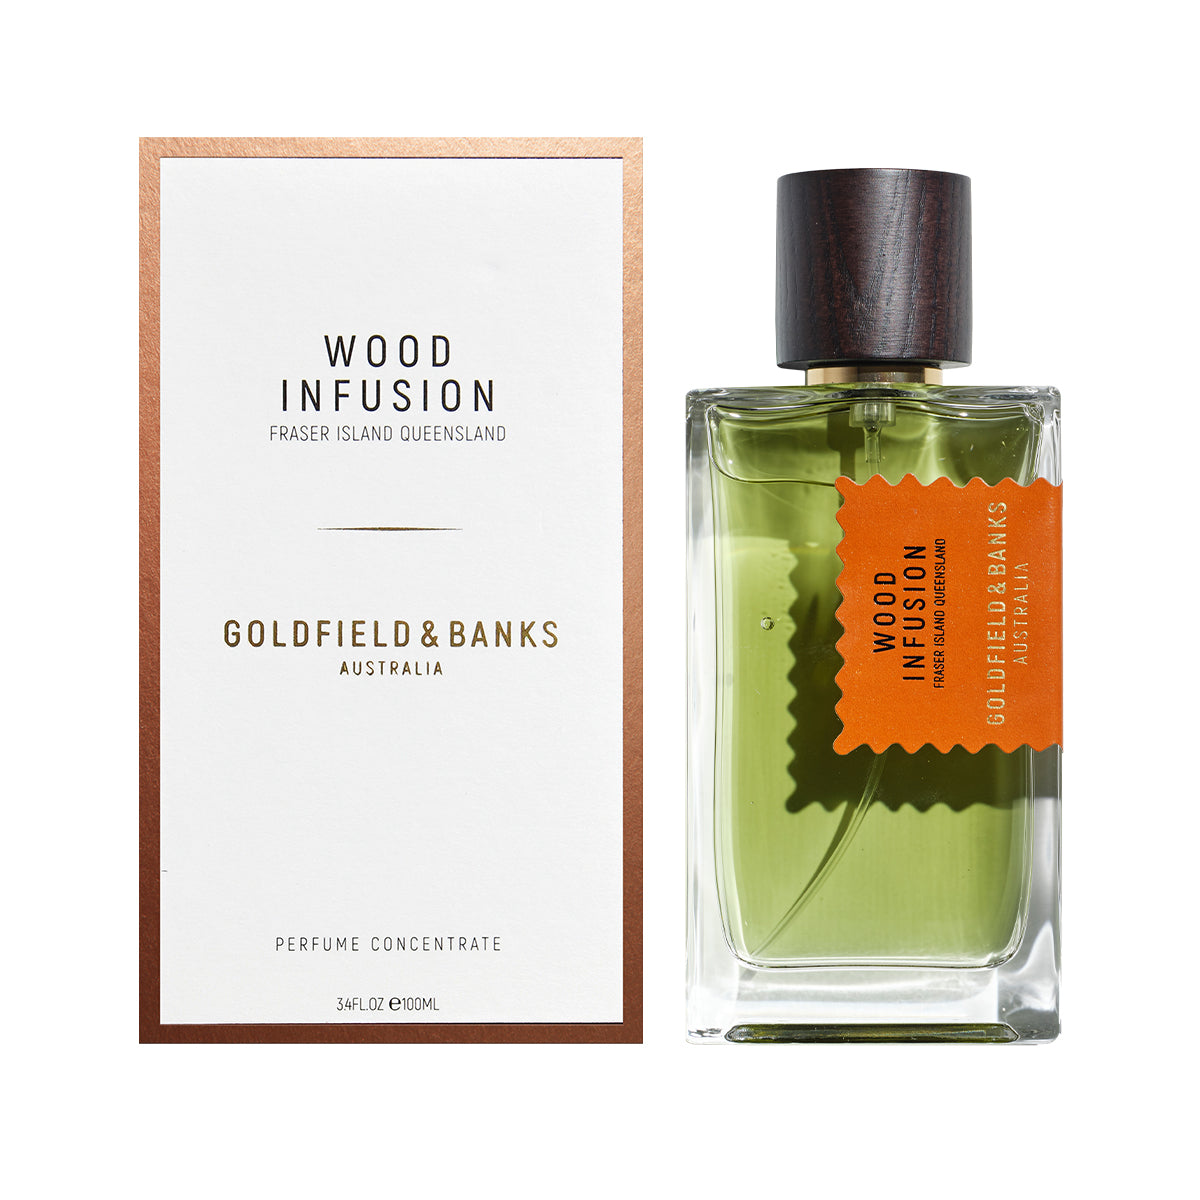 Wood Infusion – Goldfield & Banks – EP 100ml